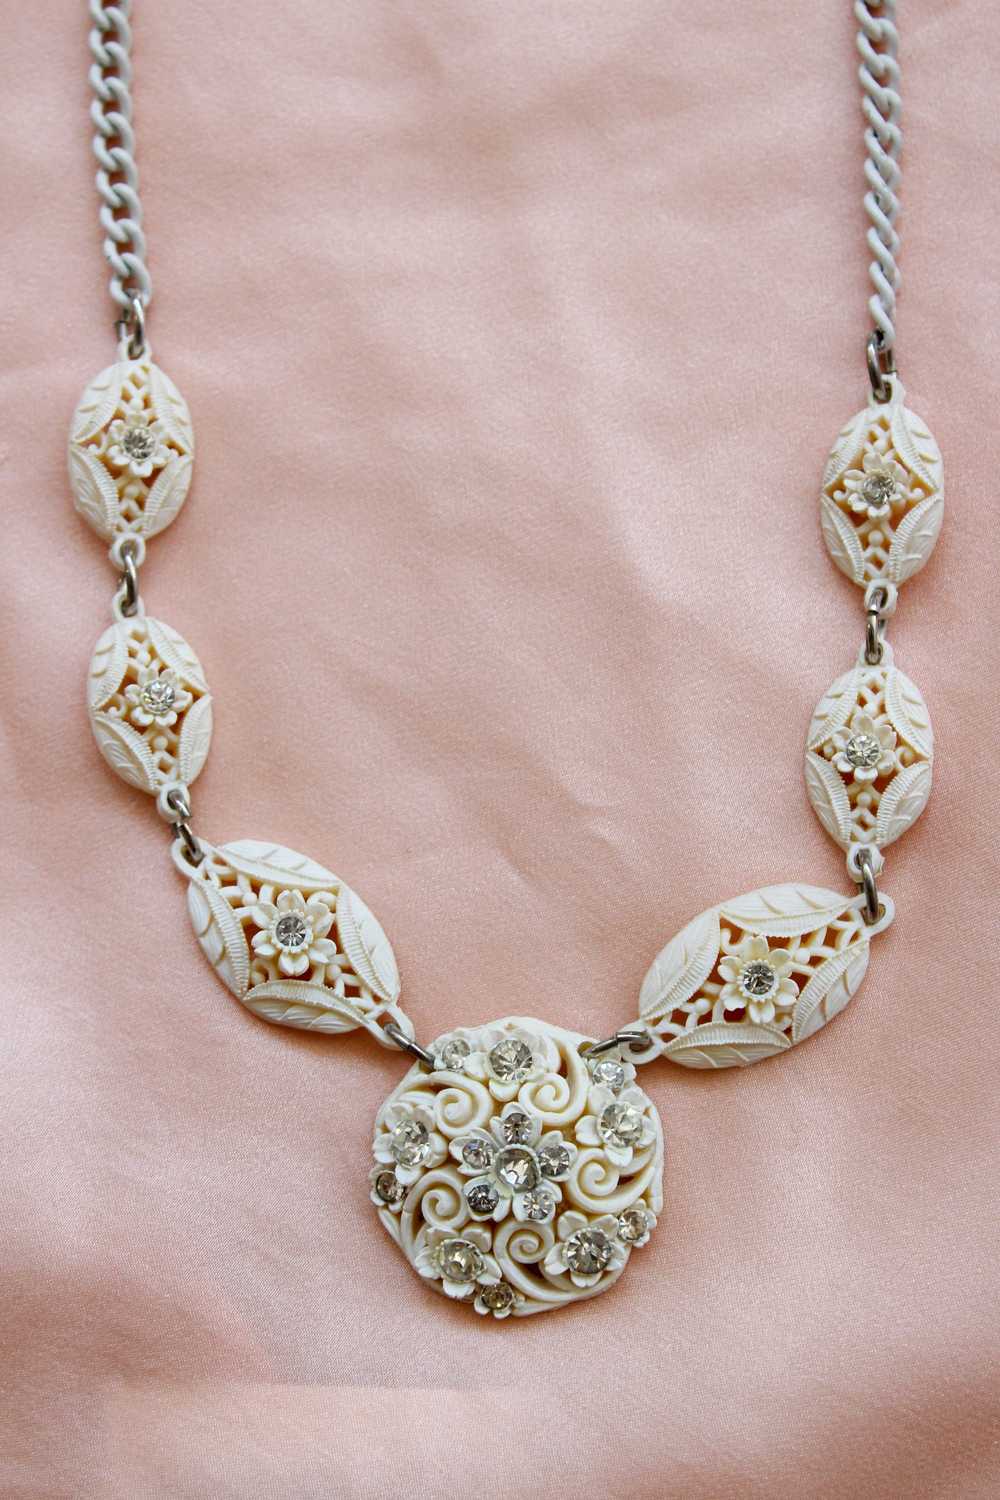 1950s White Carved Celluloid Rhinestone Necklace - image 3